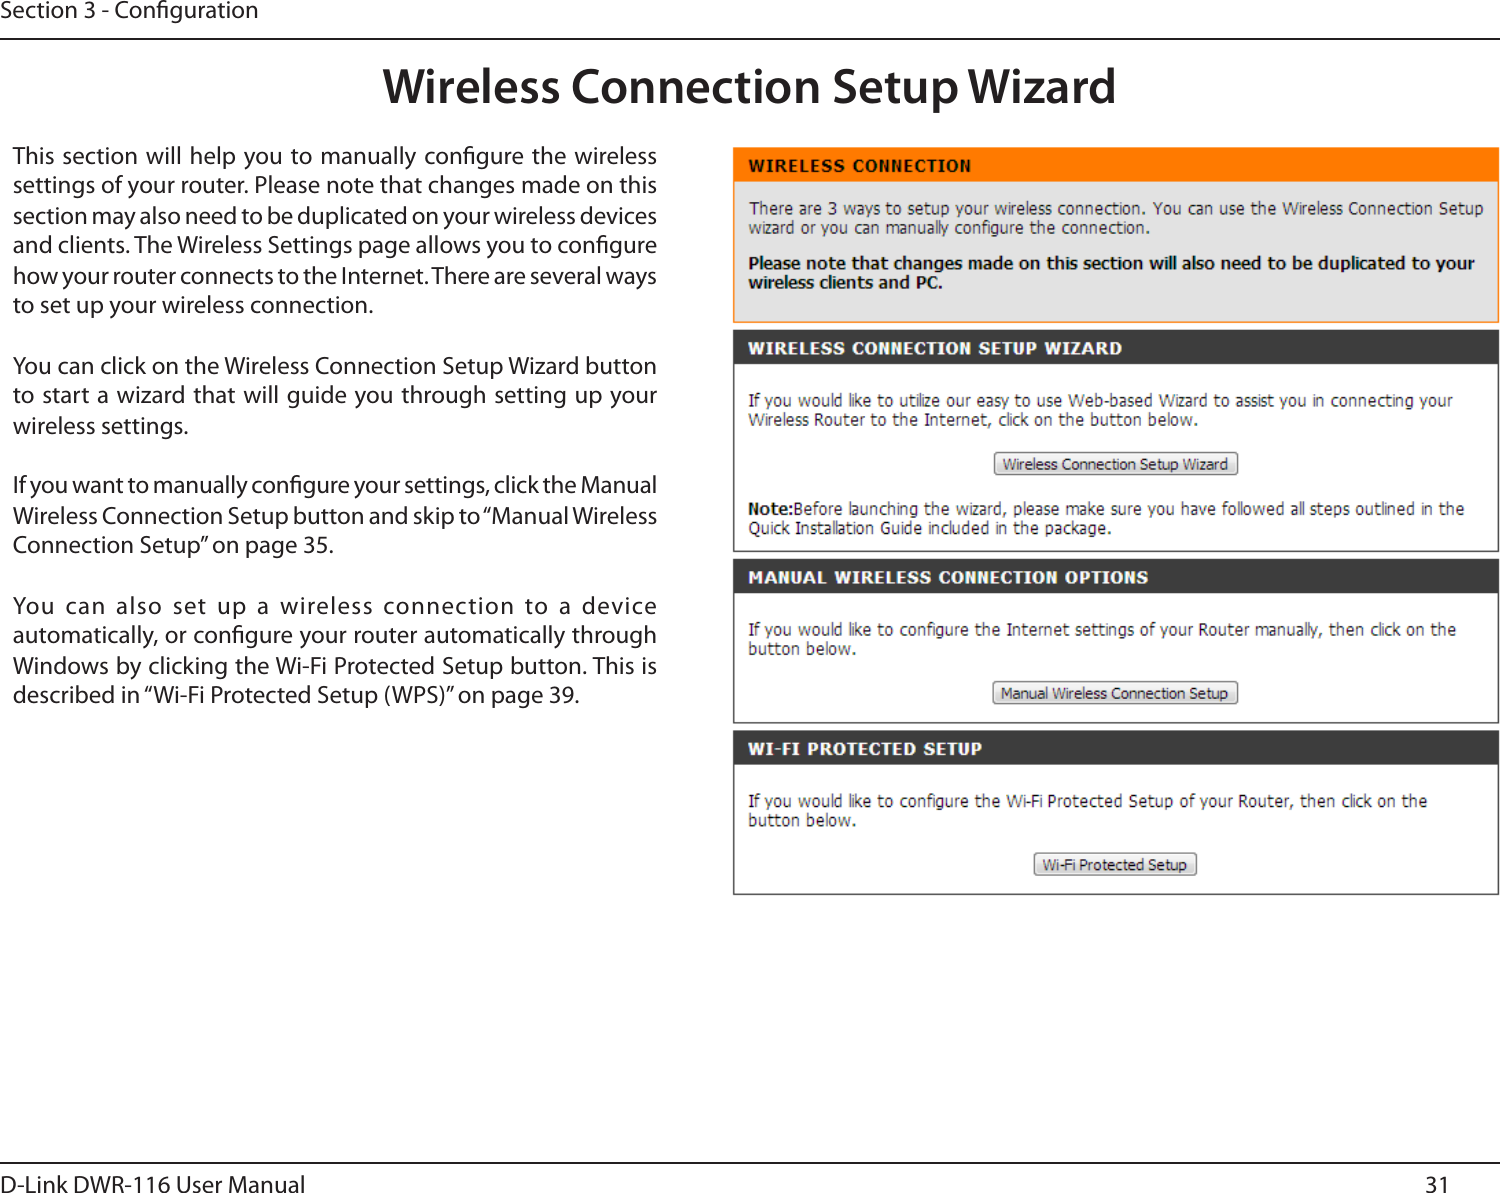 31D-Link DWR-116 User ManualSection 3 - CongurationWireless Connection Setup WizardThis section will help you to manually congure the wireless settings of your router. Please note that changes made on this section may also need to be duplicated on your wireless devices and clients. The Wireless Settings page allows you to congure how your router connects to the Internet. There are several ways to set up your wireless connection. You can click on the Wireless Connection Setup Wizard button to start a wizard that will guide you through setting up your wireless settings. If you want to manually congure your settings, click the Manual Wireless Connection Setup button and skip to “Manual Wireless Connection Setup” on page 35. You can  also set  up a  wireless connection  to a device automatically, or congure your router automatically through Windows by clicking the Wi-Fi Protected Setup button. This is described in “Wi-Fi Protected Setup (WPS)” on page 39.